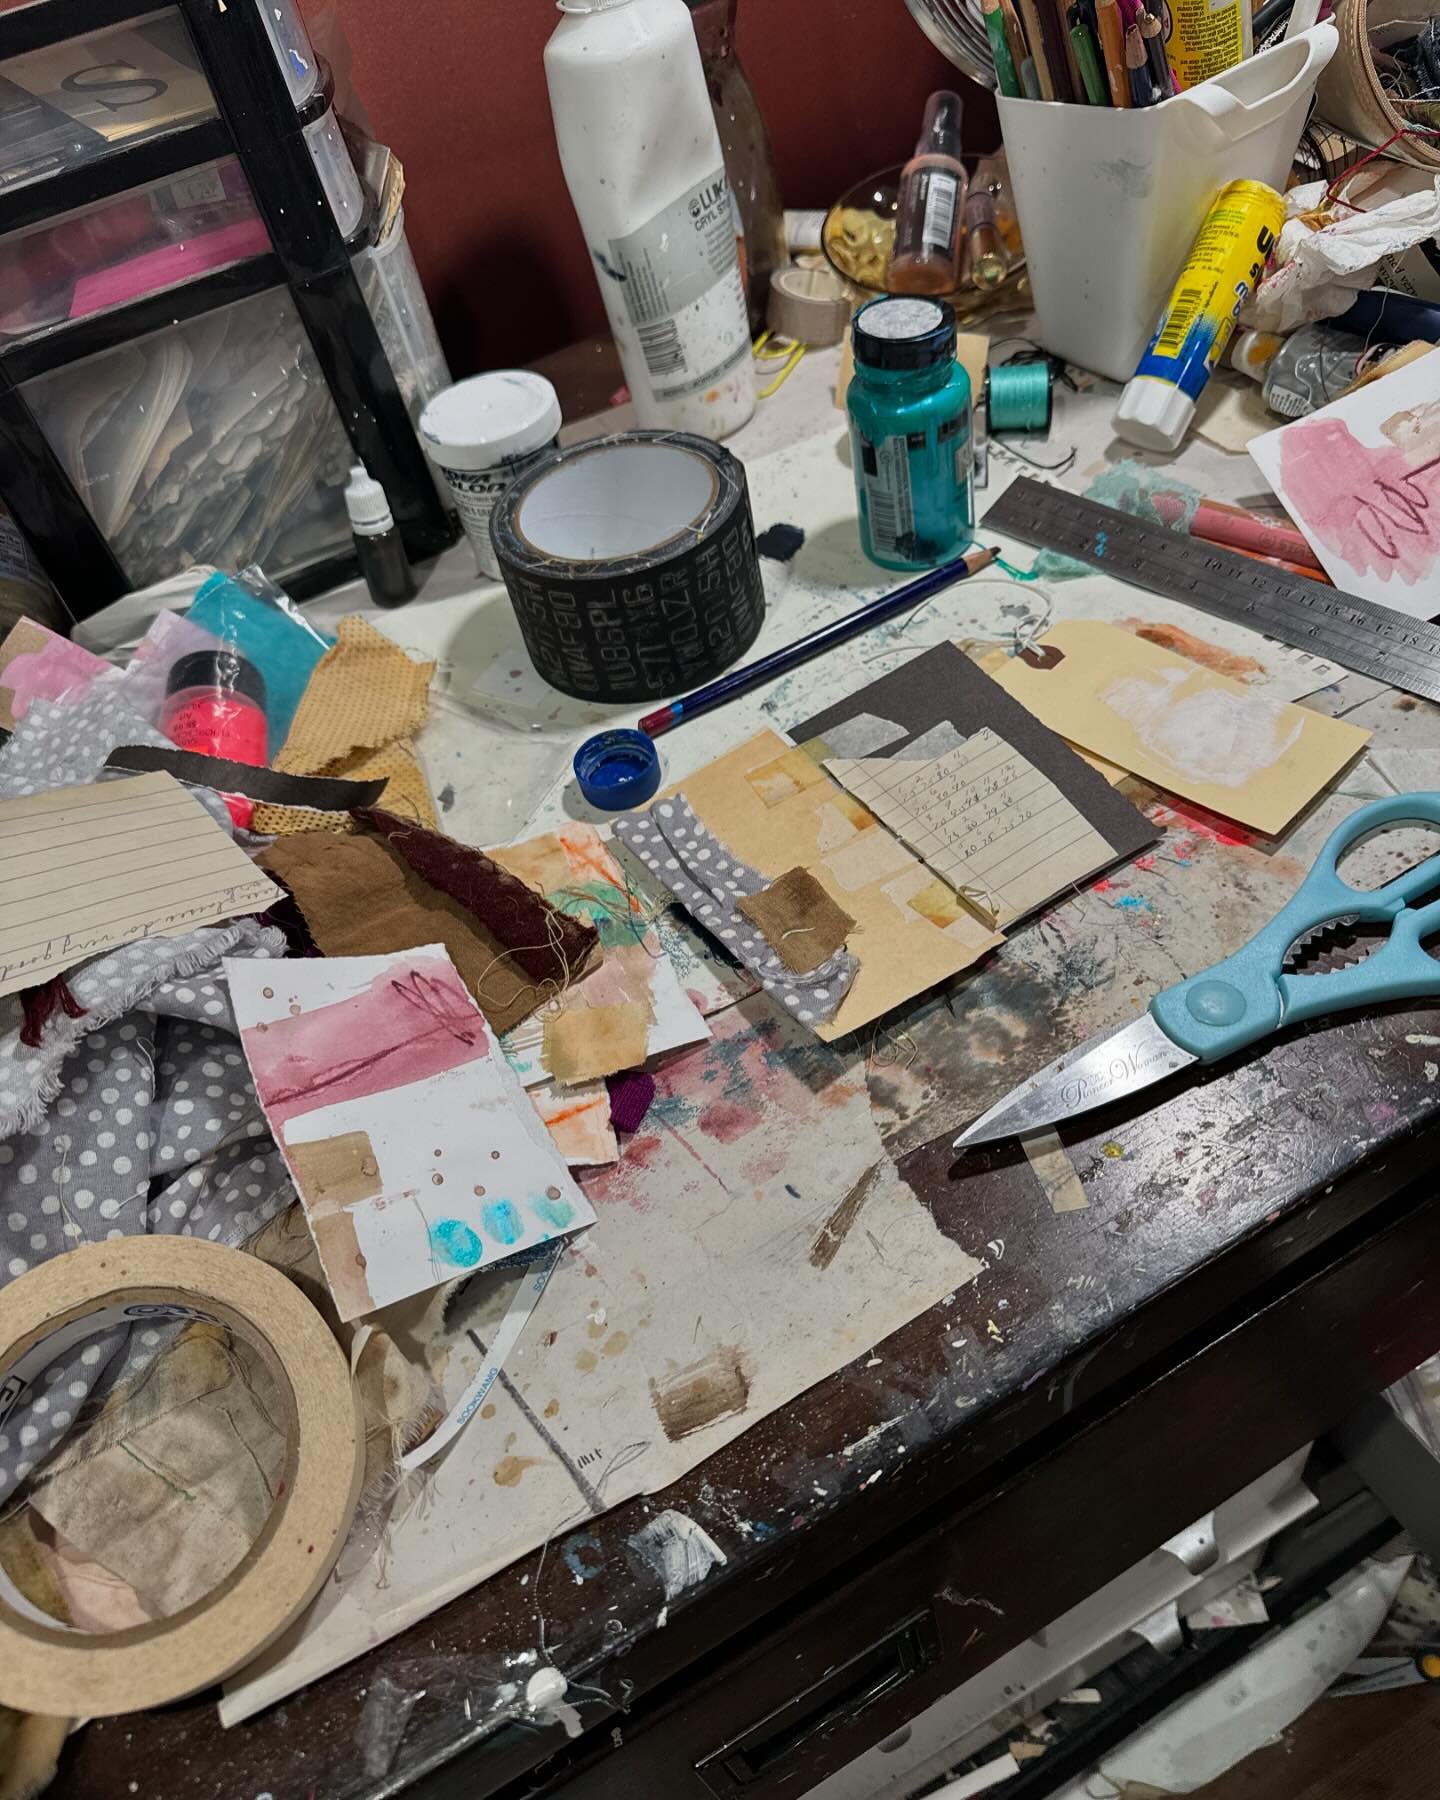 The reality of my life is no matter how I try to clean up. It only takes a few minutes to get it messy. 

What&rsquo;s your workspace looking like? Go ahead snap a pic and tag me cause I wanna see. 

#artist #artspace #mixedmedia #artstudio #hotmesse